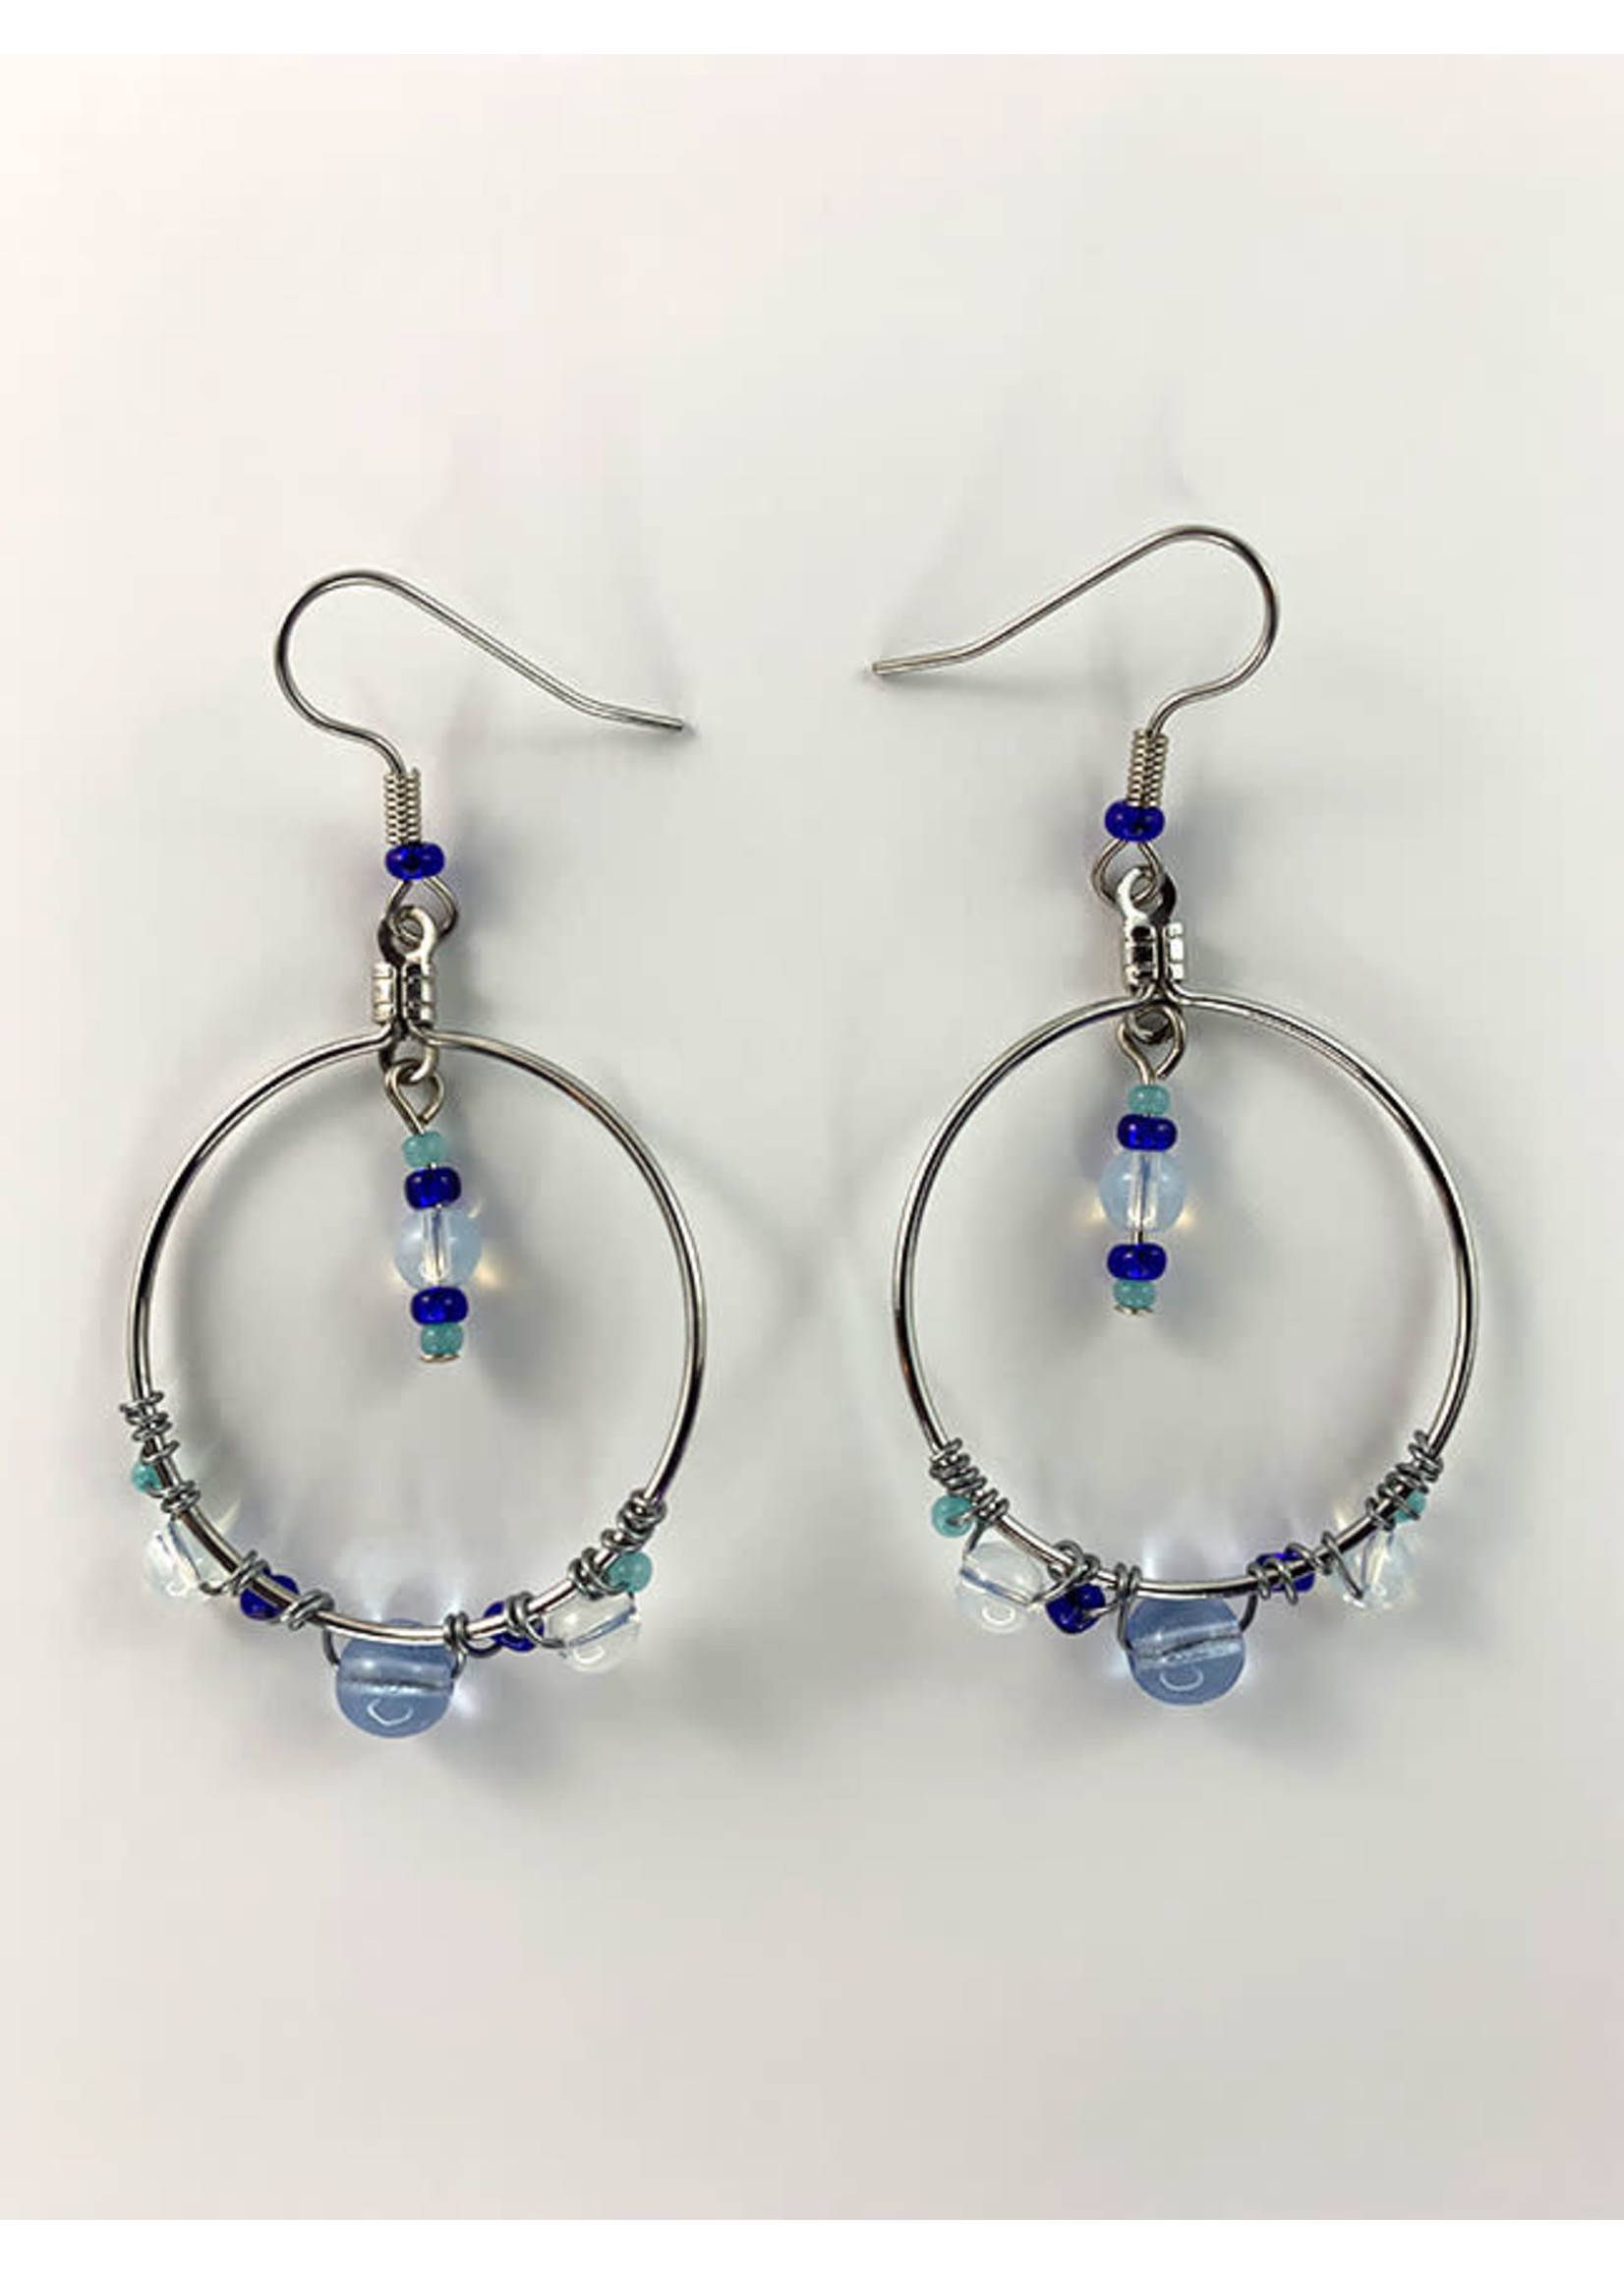 Circle of Eagles Beaded Earrings Hoops - Blue and White Beads